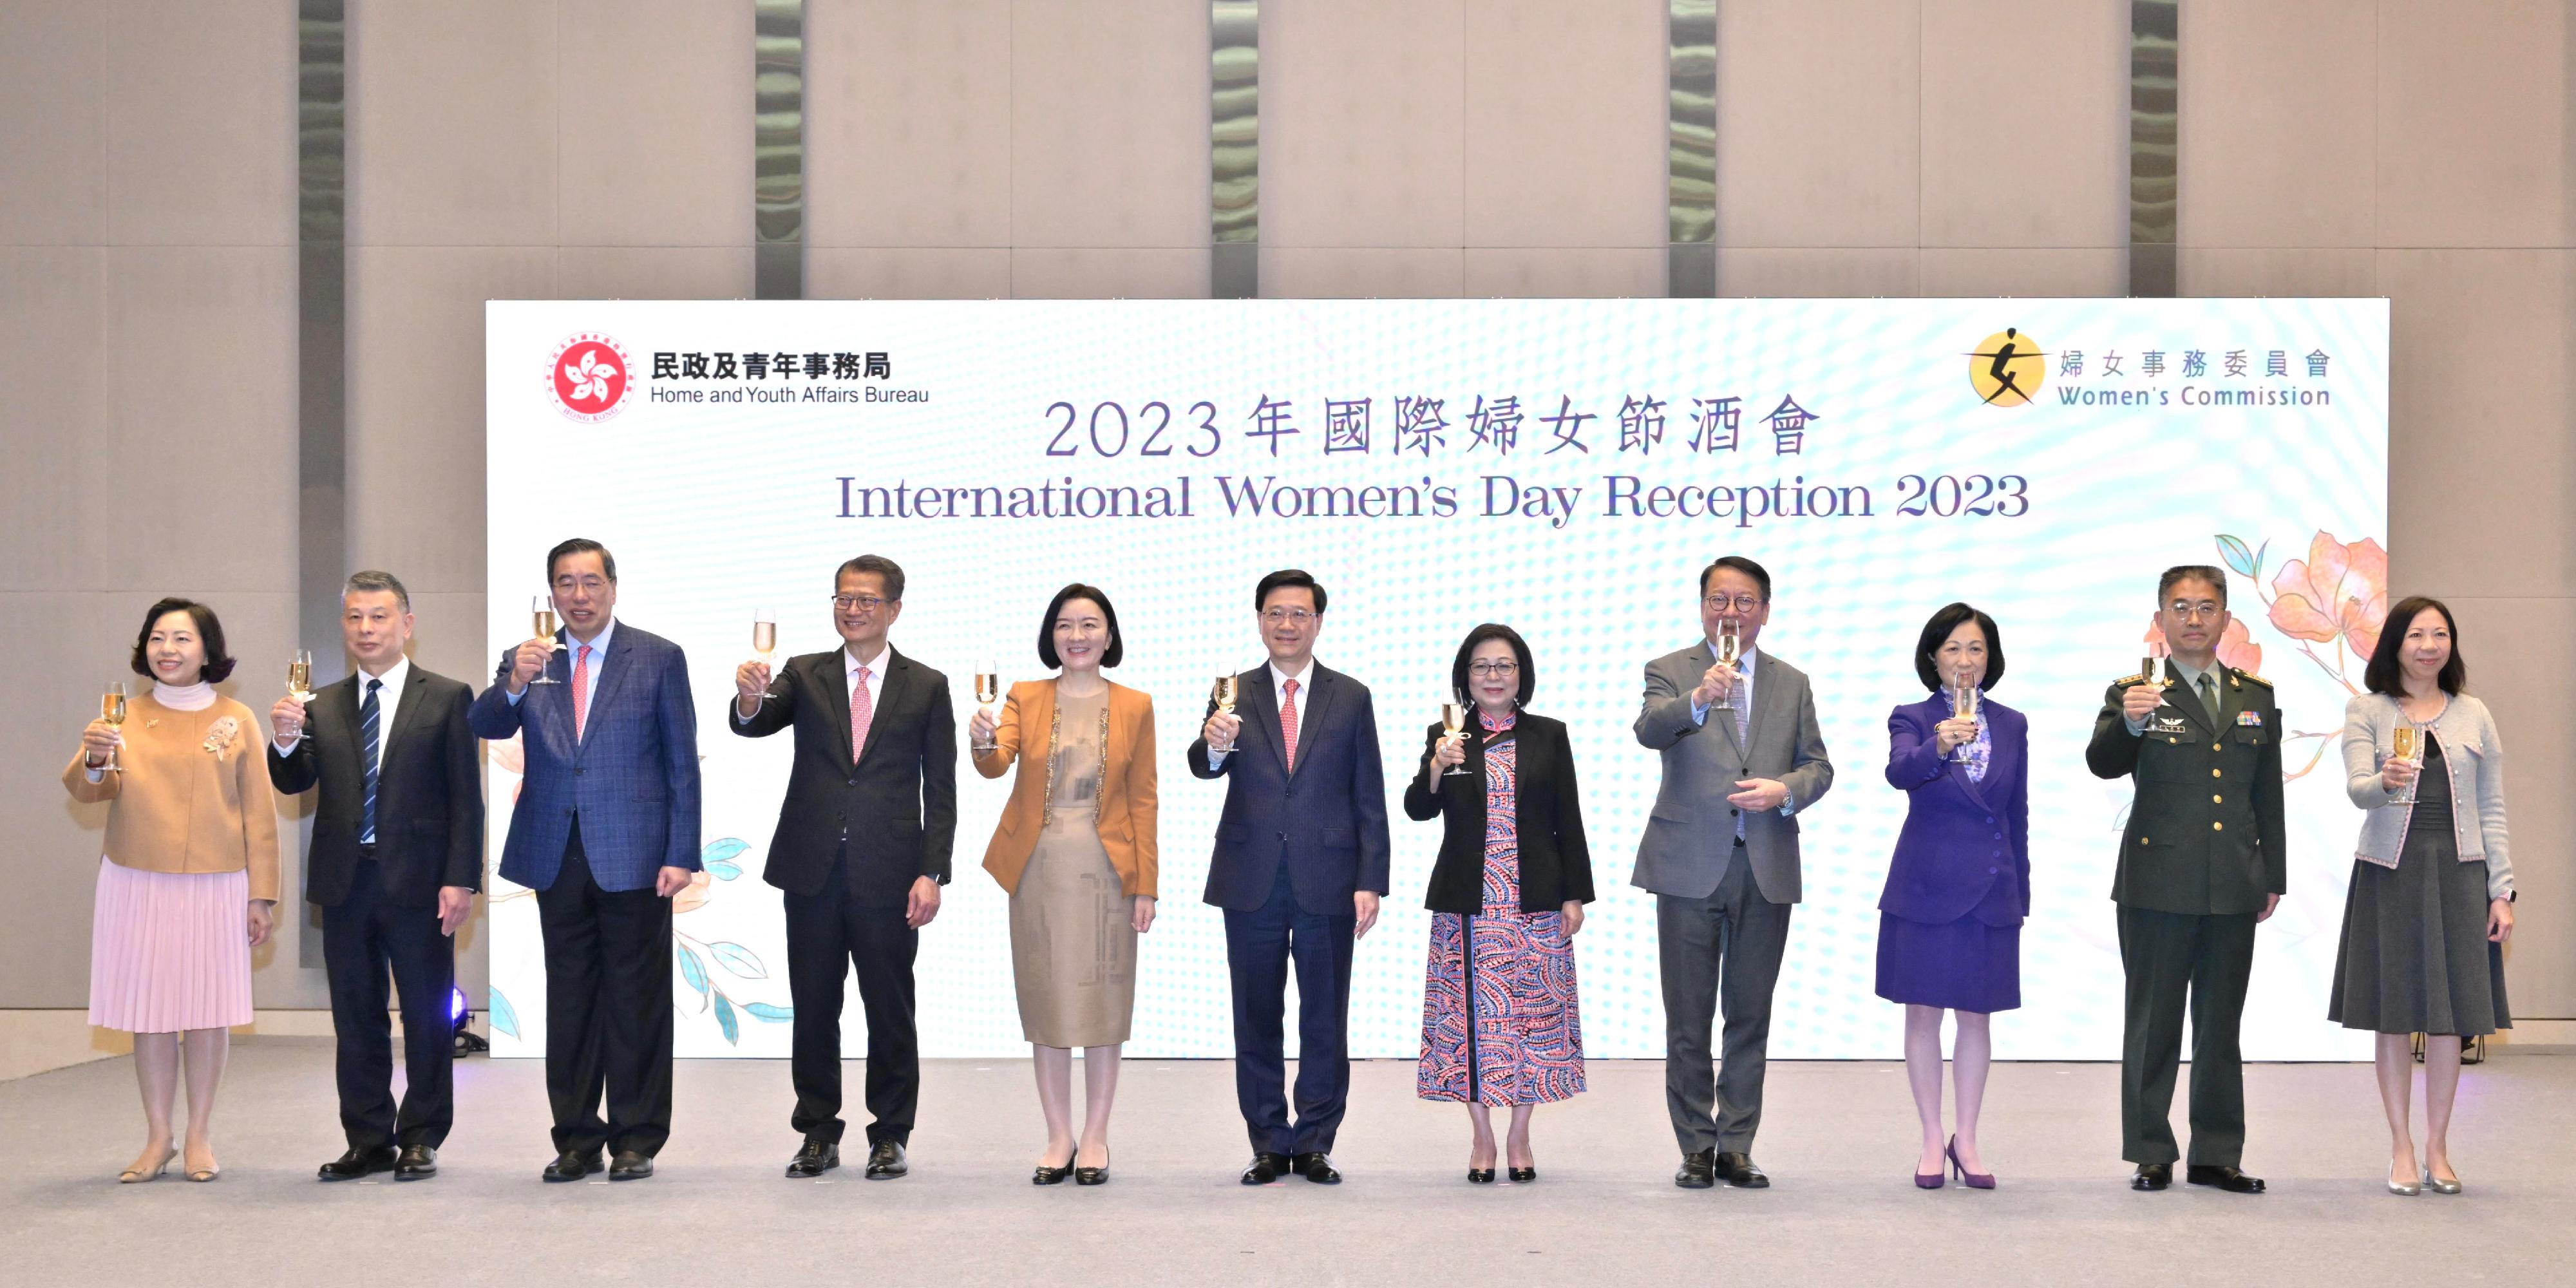 The Chief Executive, Mr John Lee, attended the International Women's Day Reception 2023 today (March 8). Photo shows (from left) the Secretary for Home and Youth Affairs, Miss Alice Mak; the Deputy Director General of the Office for Safeguarding National Security of the Central People's Government (CPG) in the Hong Kong Special Administrative Region (HKSAR) Mr Wang Wenxian; the President of the Legislative Council, Mr Andrew Leung; the Financial Secretary, Mr Paul Chan; Deputy Director of the Liaison Office of the CPG in the HKSAR Ms Lu Xinning; Mr Lee and his wife Mrs Janet Lee; the Chief Secretary for Administration, Mr Chan Kwok-ki; the Convenor of the Non-official Members of the Executive Council, Mrs Regina Ip; Deputy Director of the Political Department of the Chinese People's Liberation Army Hong Kong Garrison Senior Colonel Wang Zhixue; and the Permanent Secretary for Home and Youth Affairs, Ms Shirley Lam, officiating at the toasting ceremony.